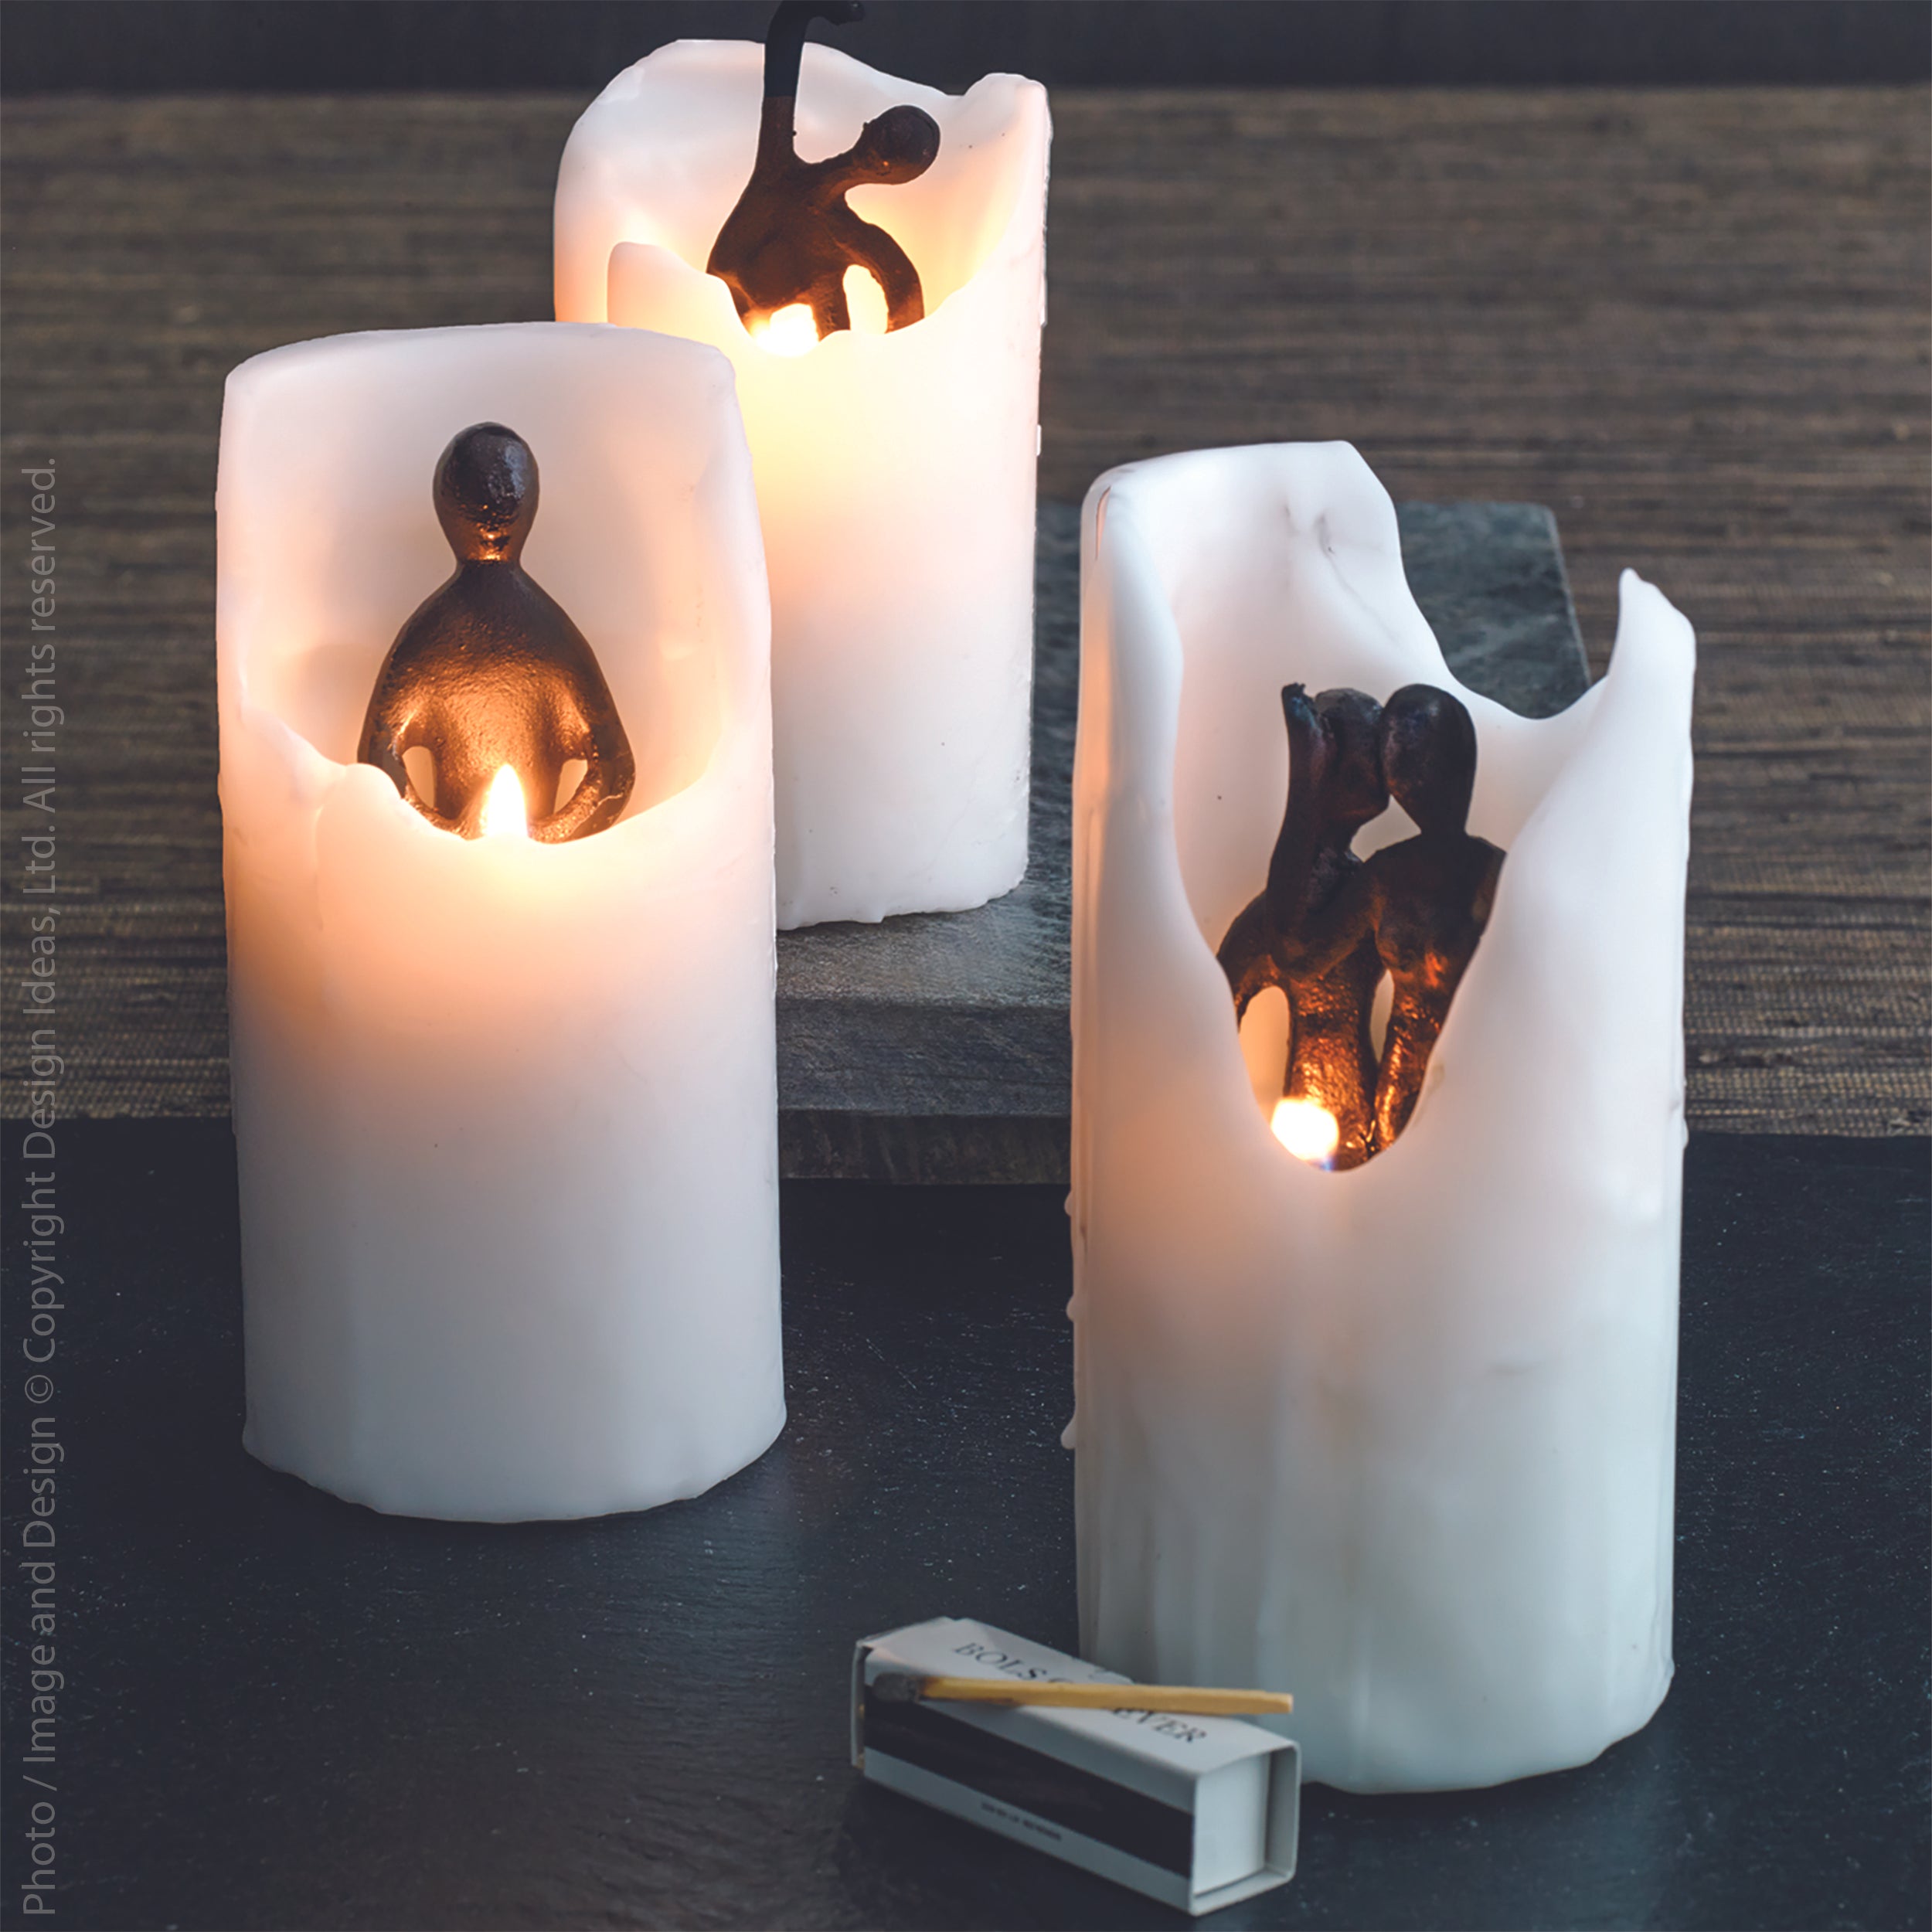 Spirit Embrace Cast Iron Candle Natural Color | Image 2 | From the Spirit Collection | Exquisitely crafted with natural cast iron for long lasting use | Available in white color | texxture home